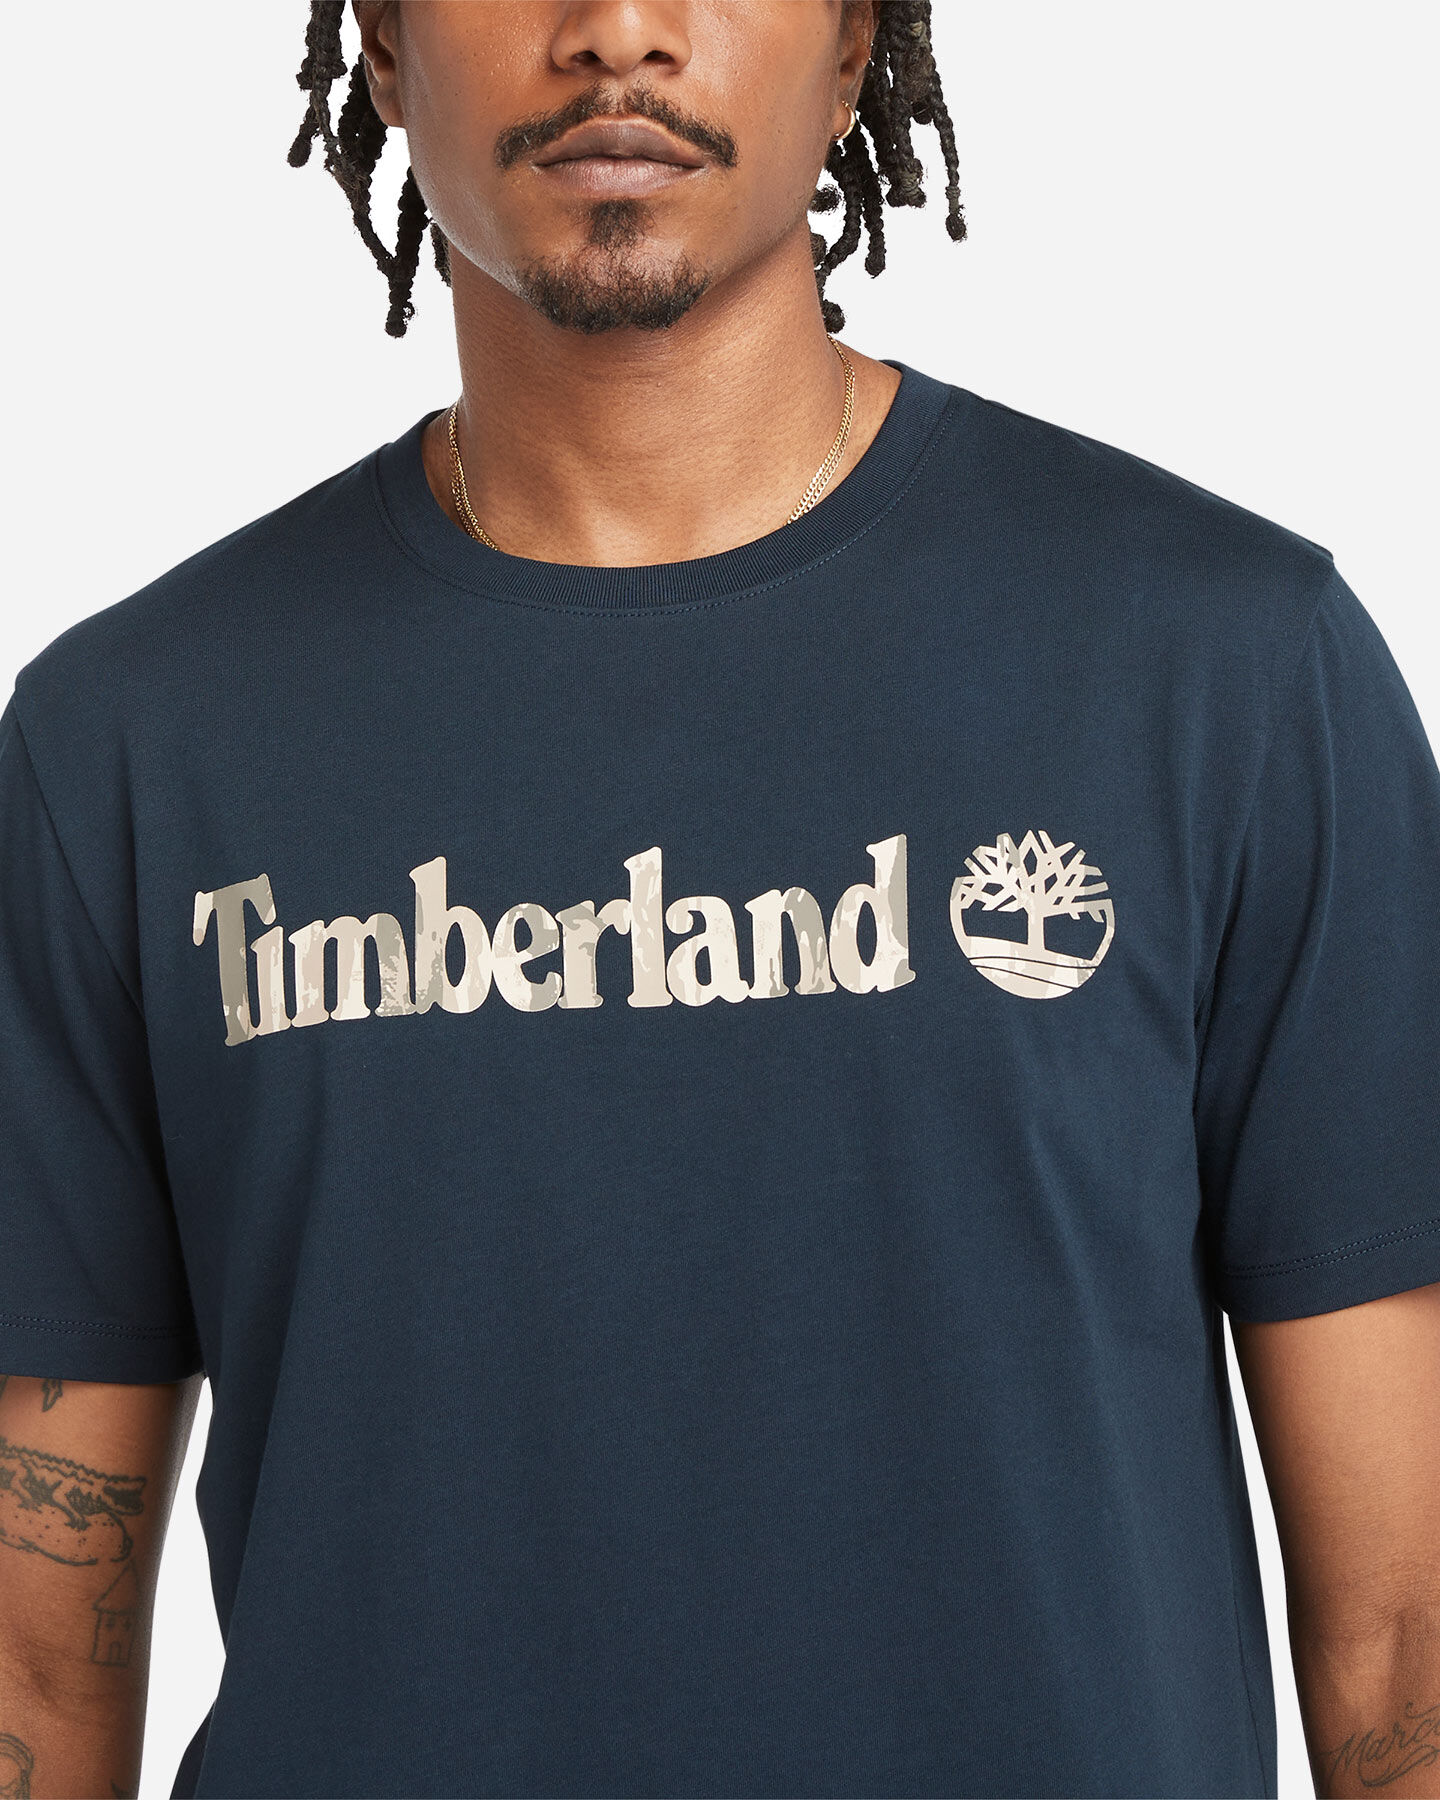  T-Shirt TIMBERLAND LINEAR LOGO M S4131479|4331|S scatto 4